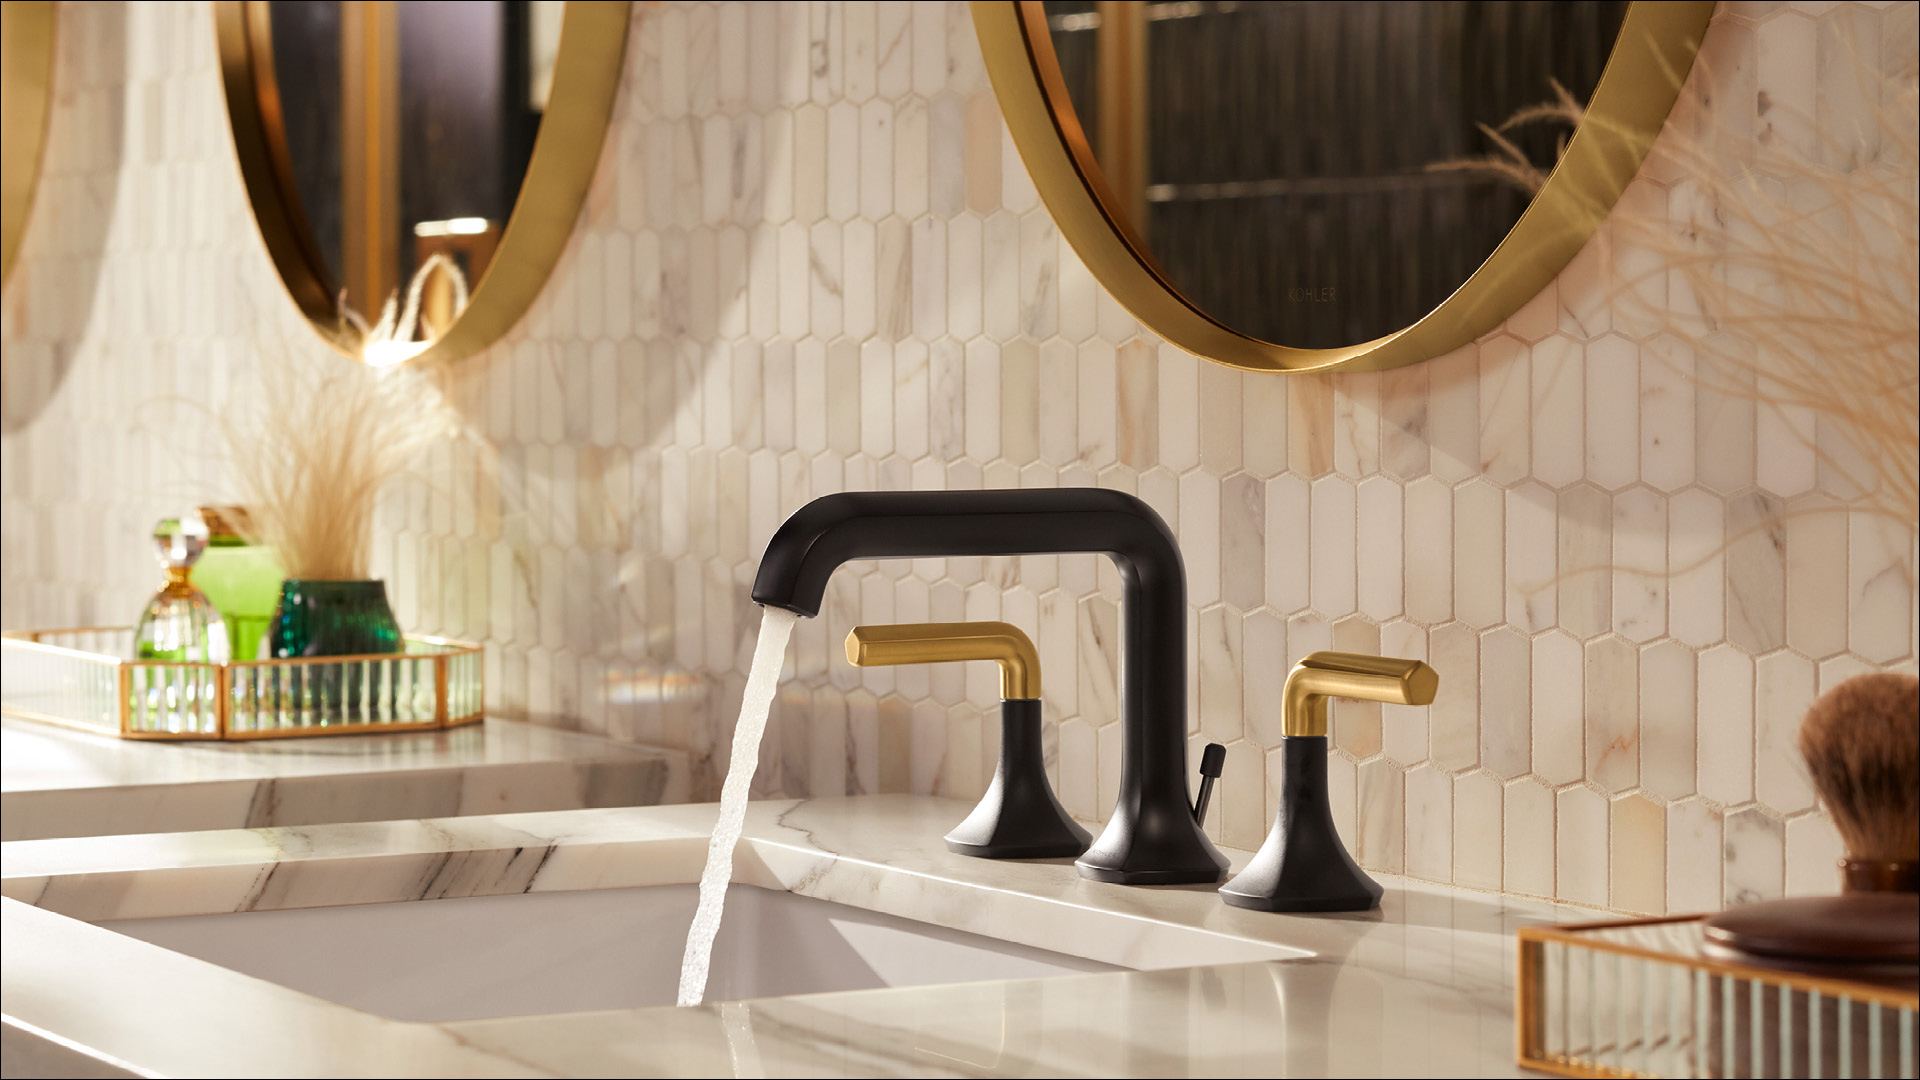 Occasion bathroom faucet collection offers a collection of lavatory and bathing faucets, along with matching accessories and striking finishes to make a gracious statement in the bathroom space.